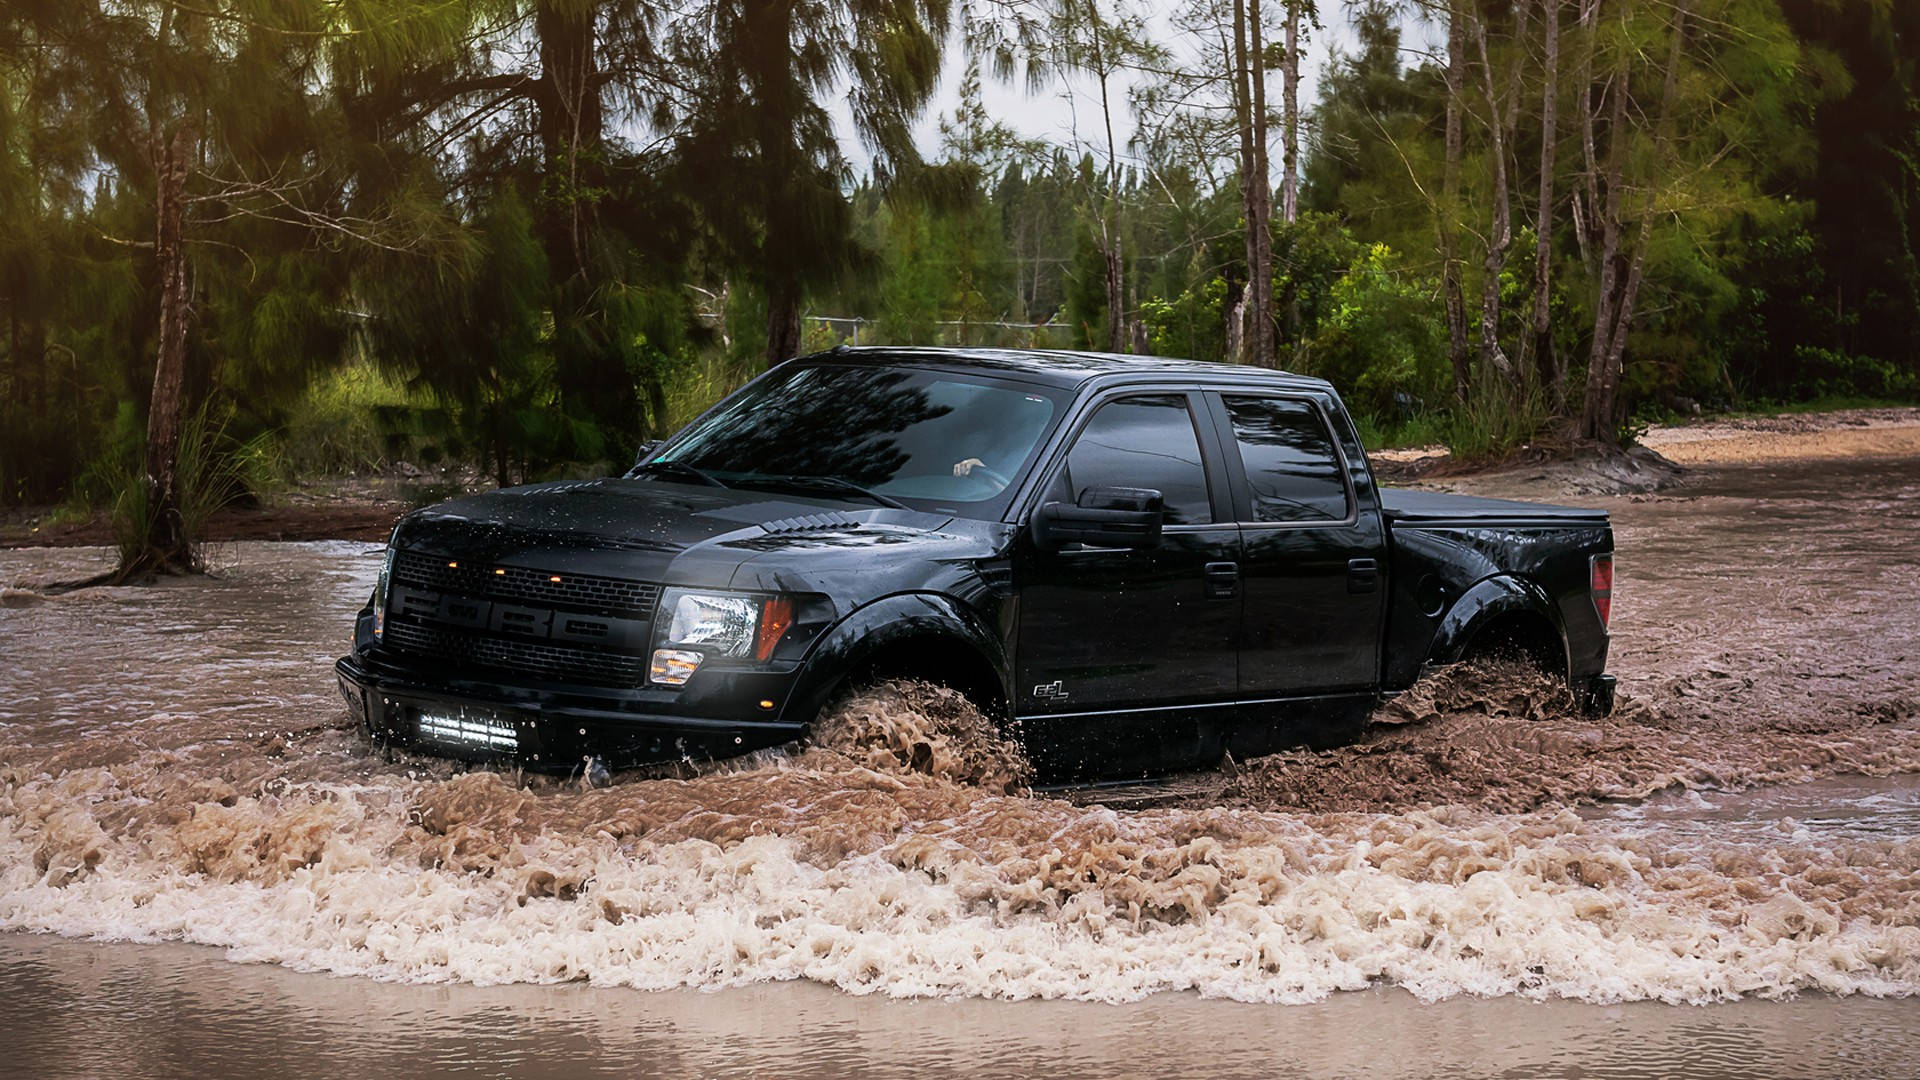 Caption: Ford Raptor Embracing The Flooded Terrain